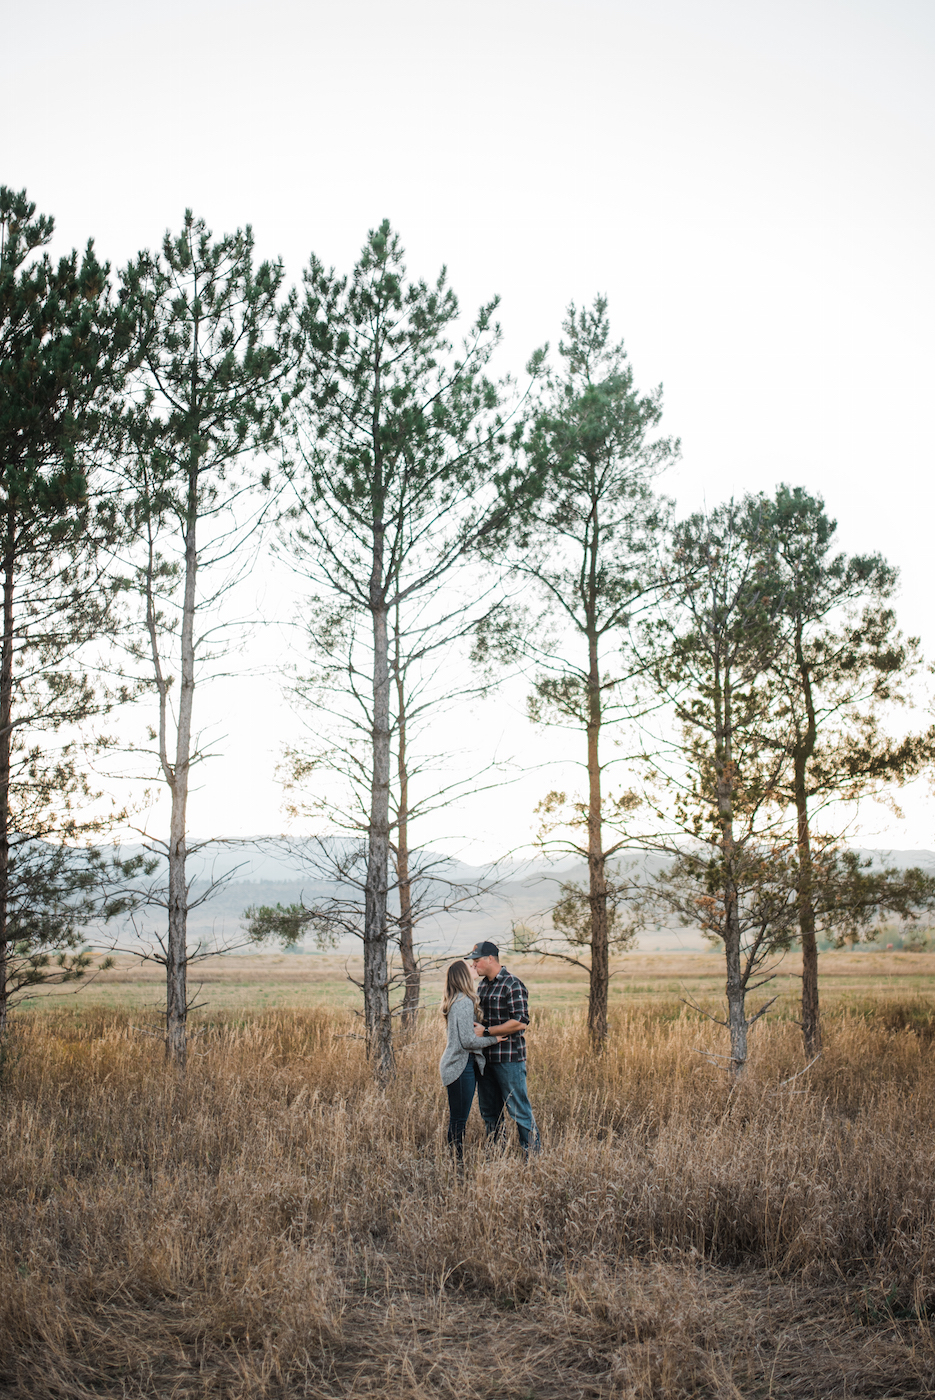 Couple standing in field kissing with tall trees in background